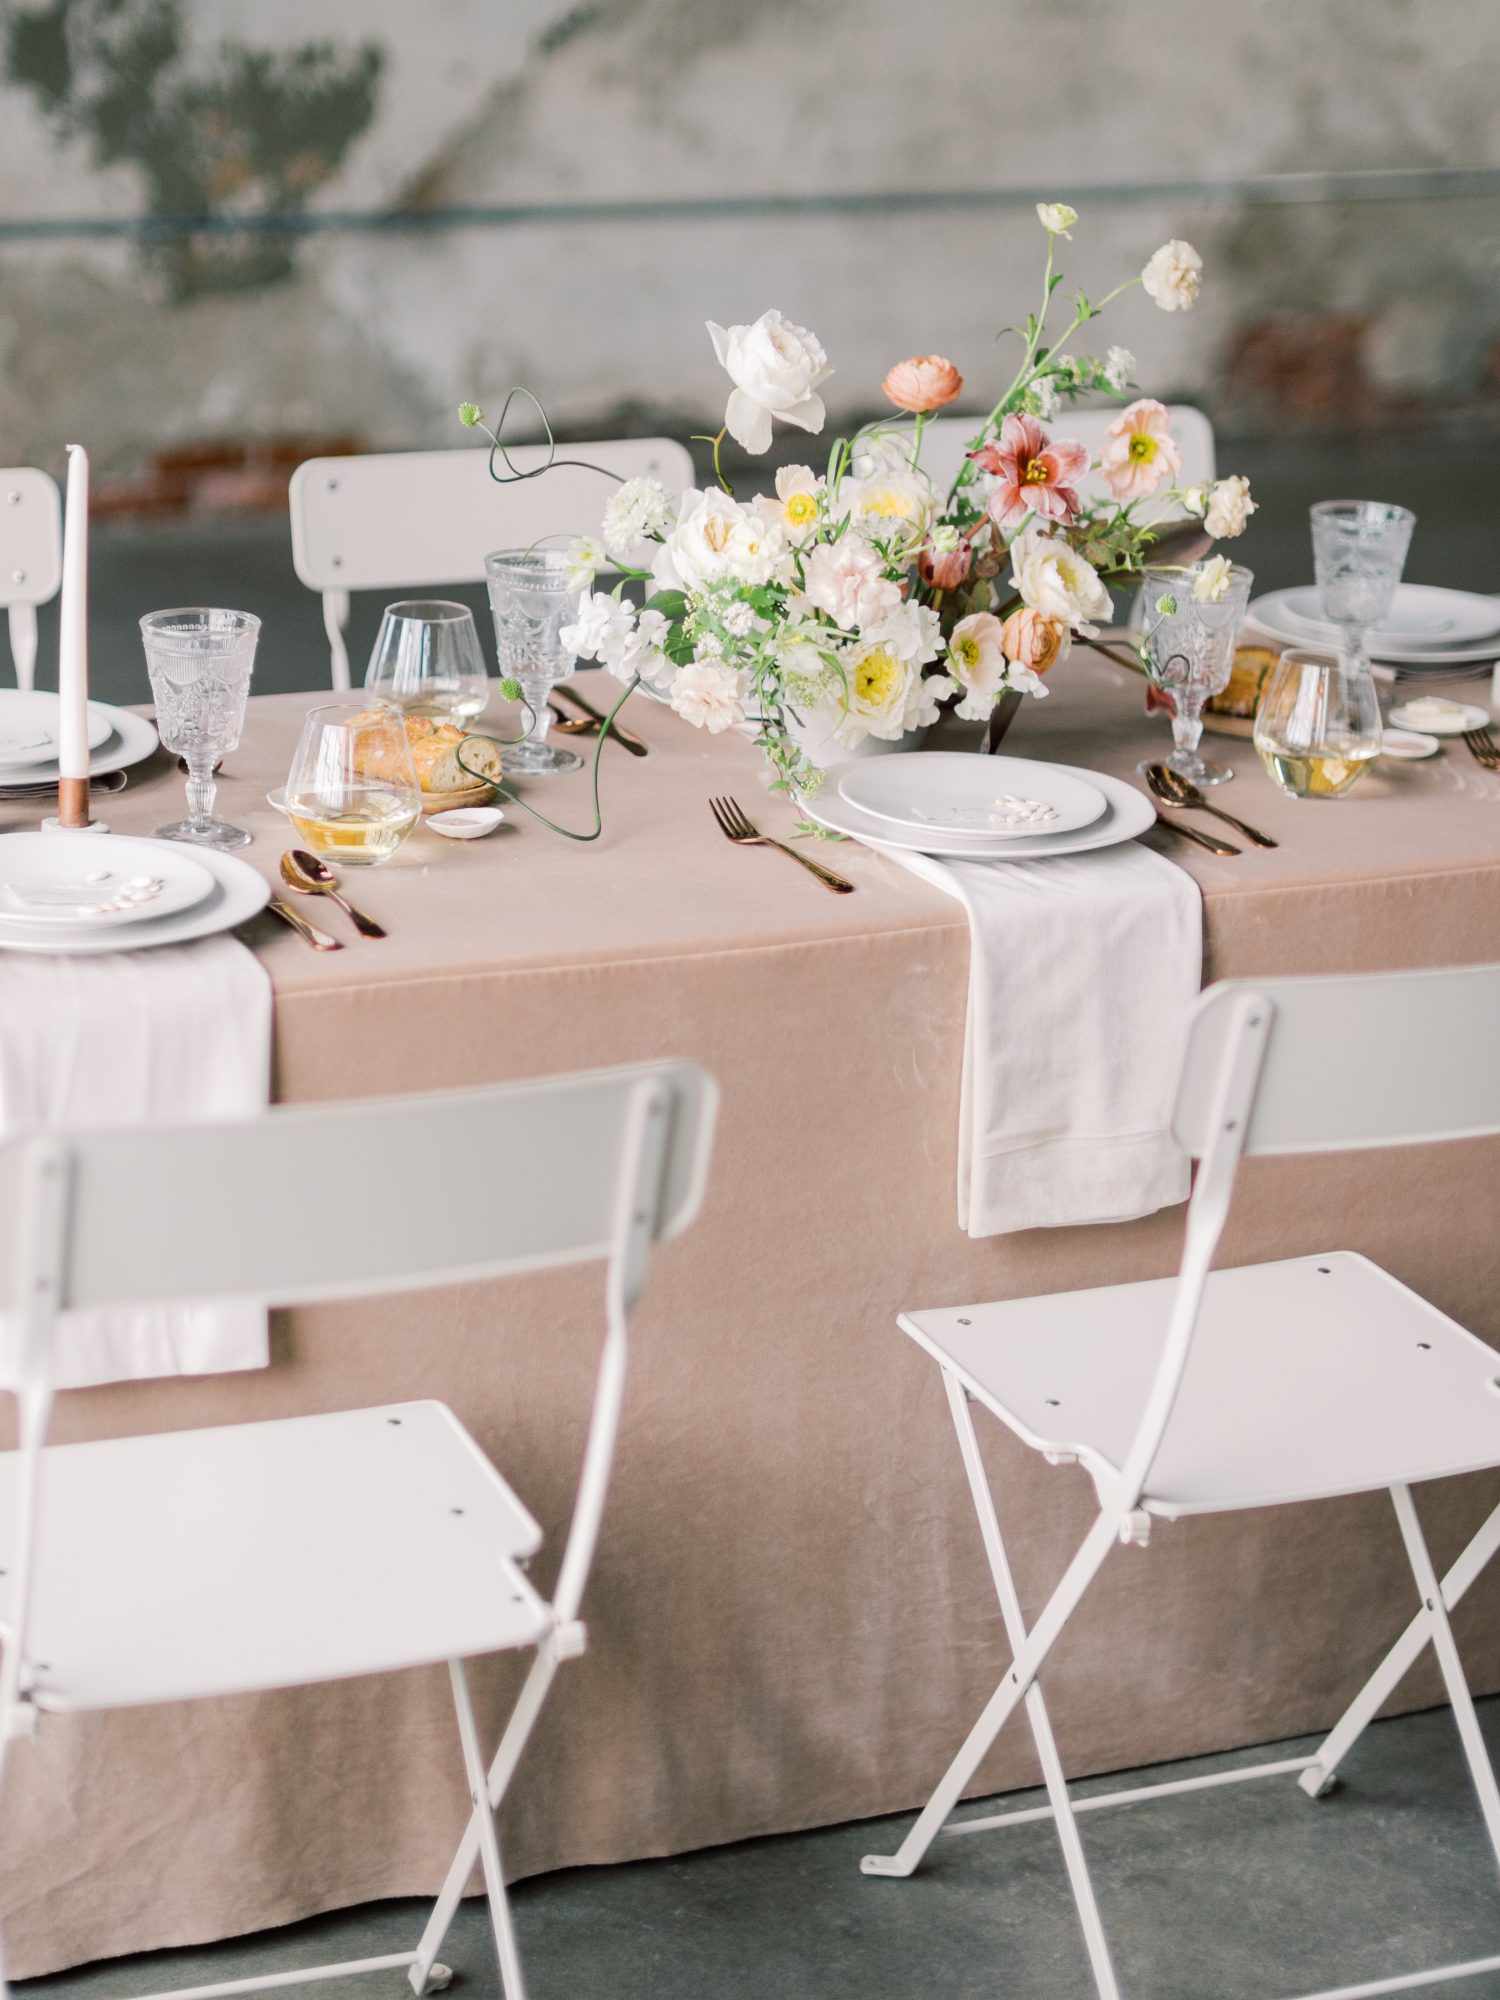 plan rehearsal dinner -  dusty rose, white and yellow tableware